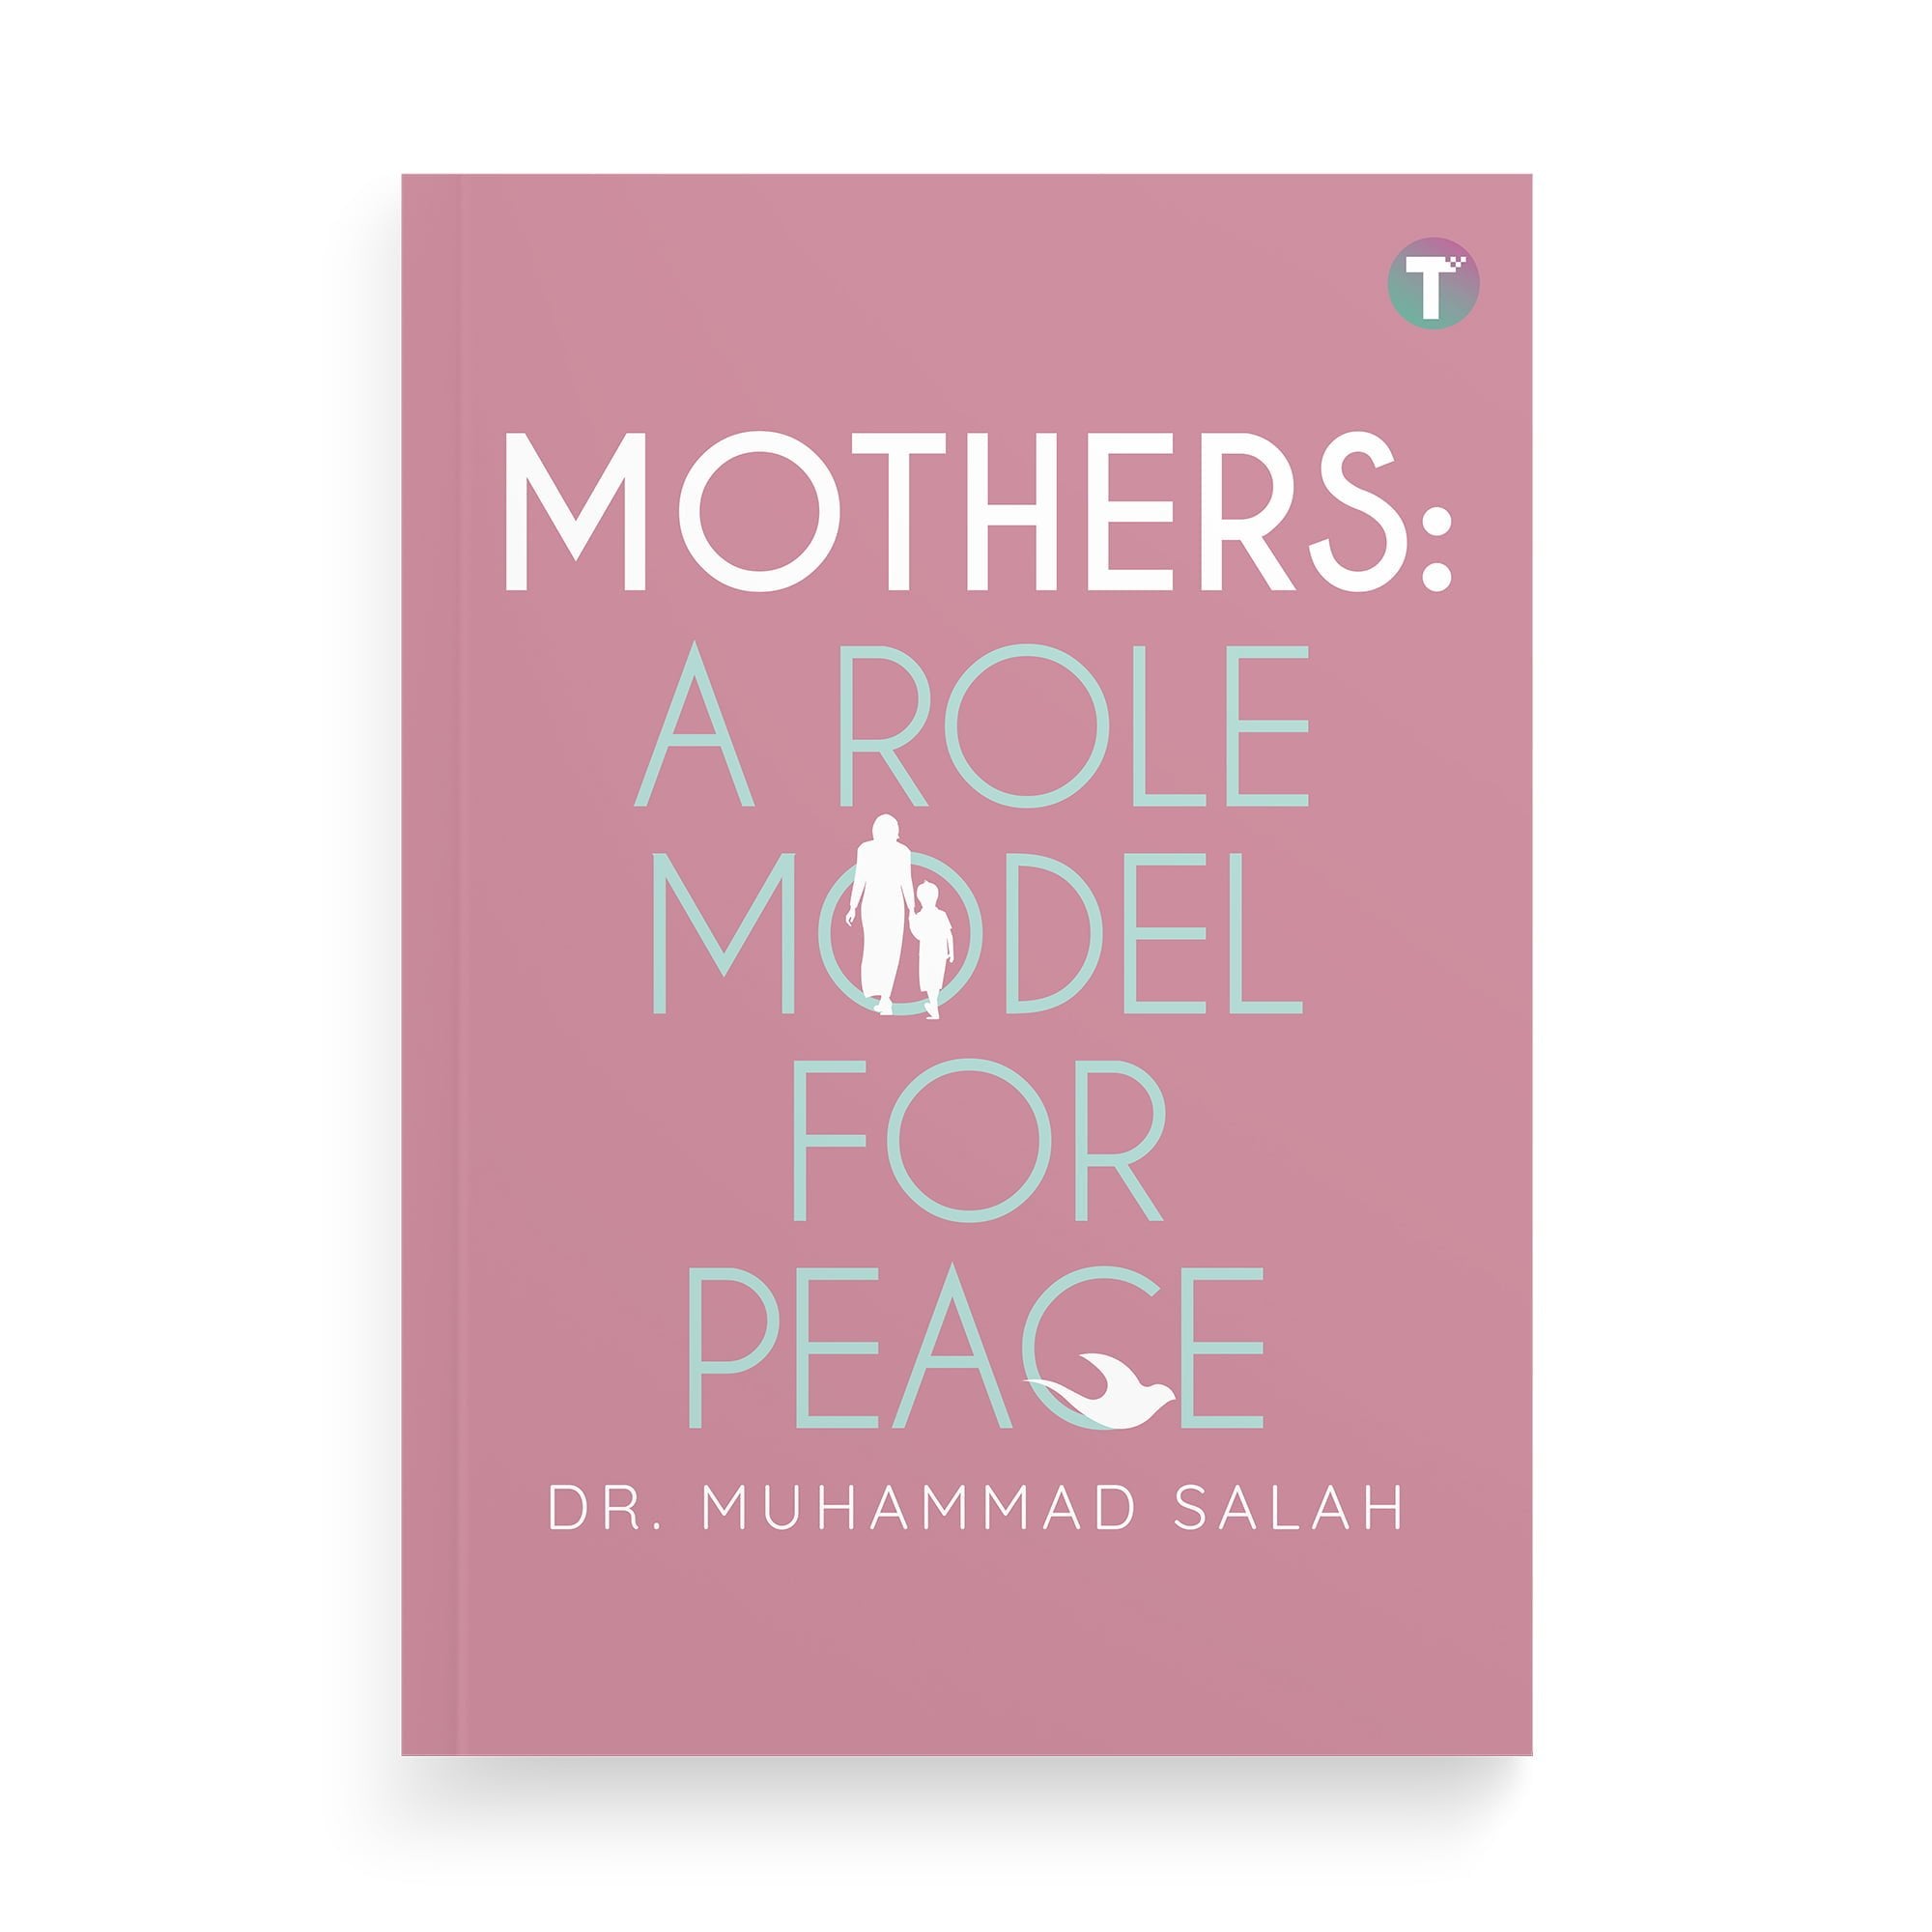 Mothers: A Role Model for Peace (DC)